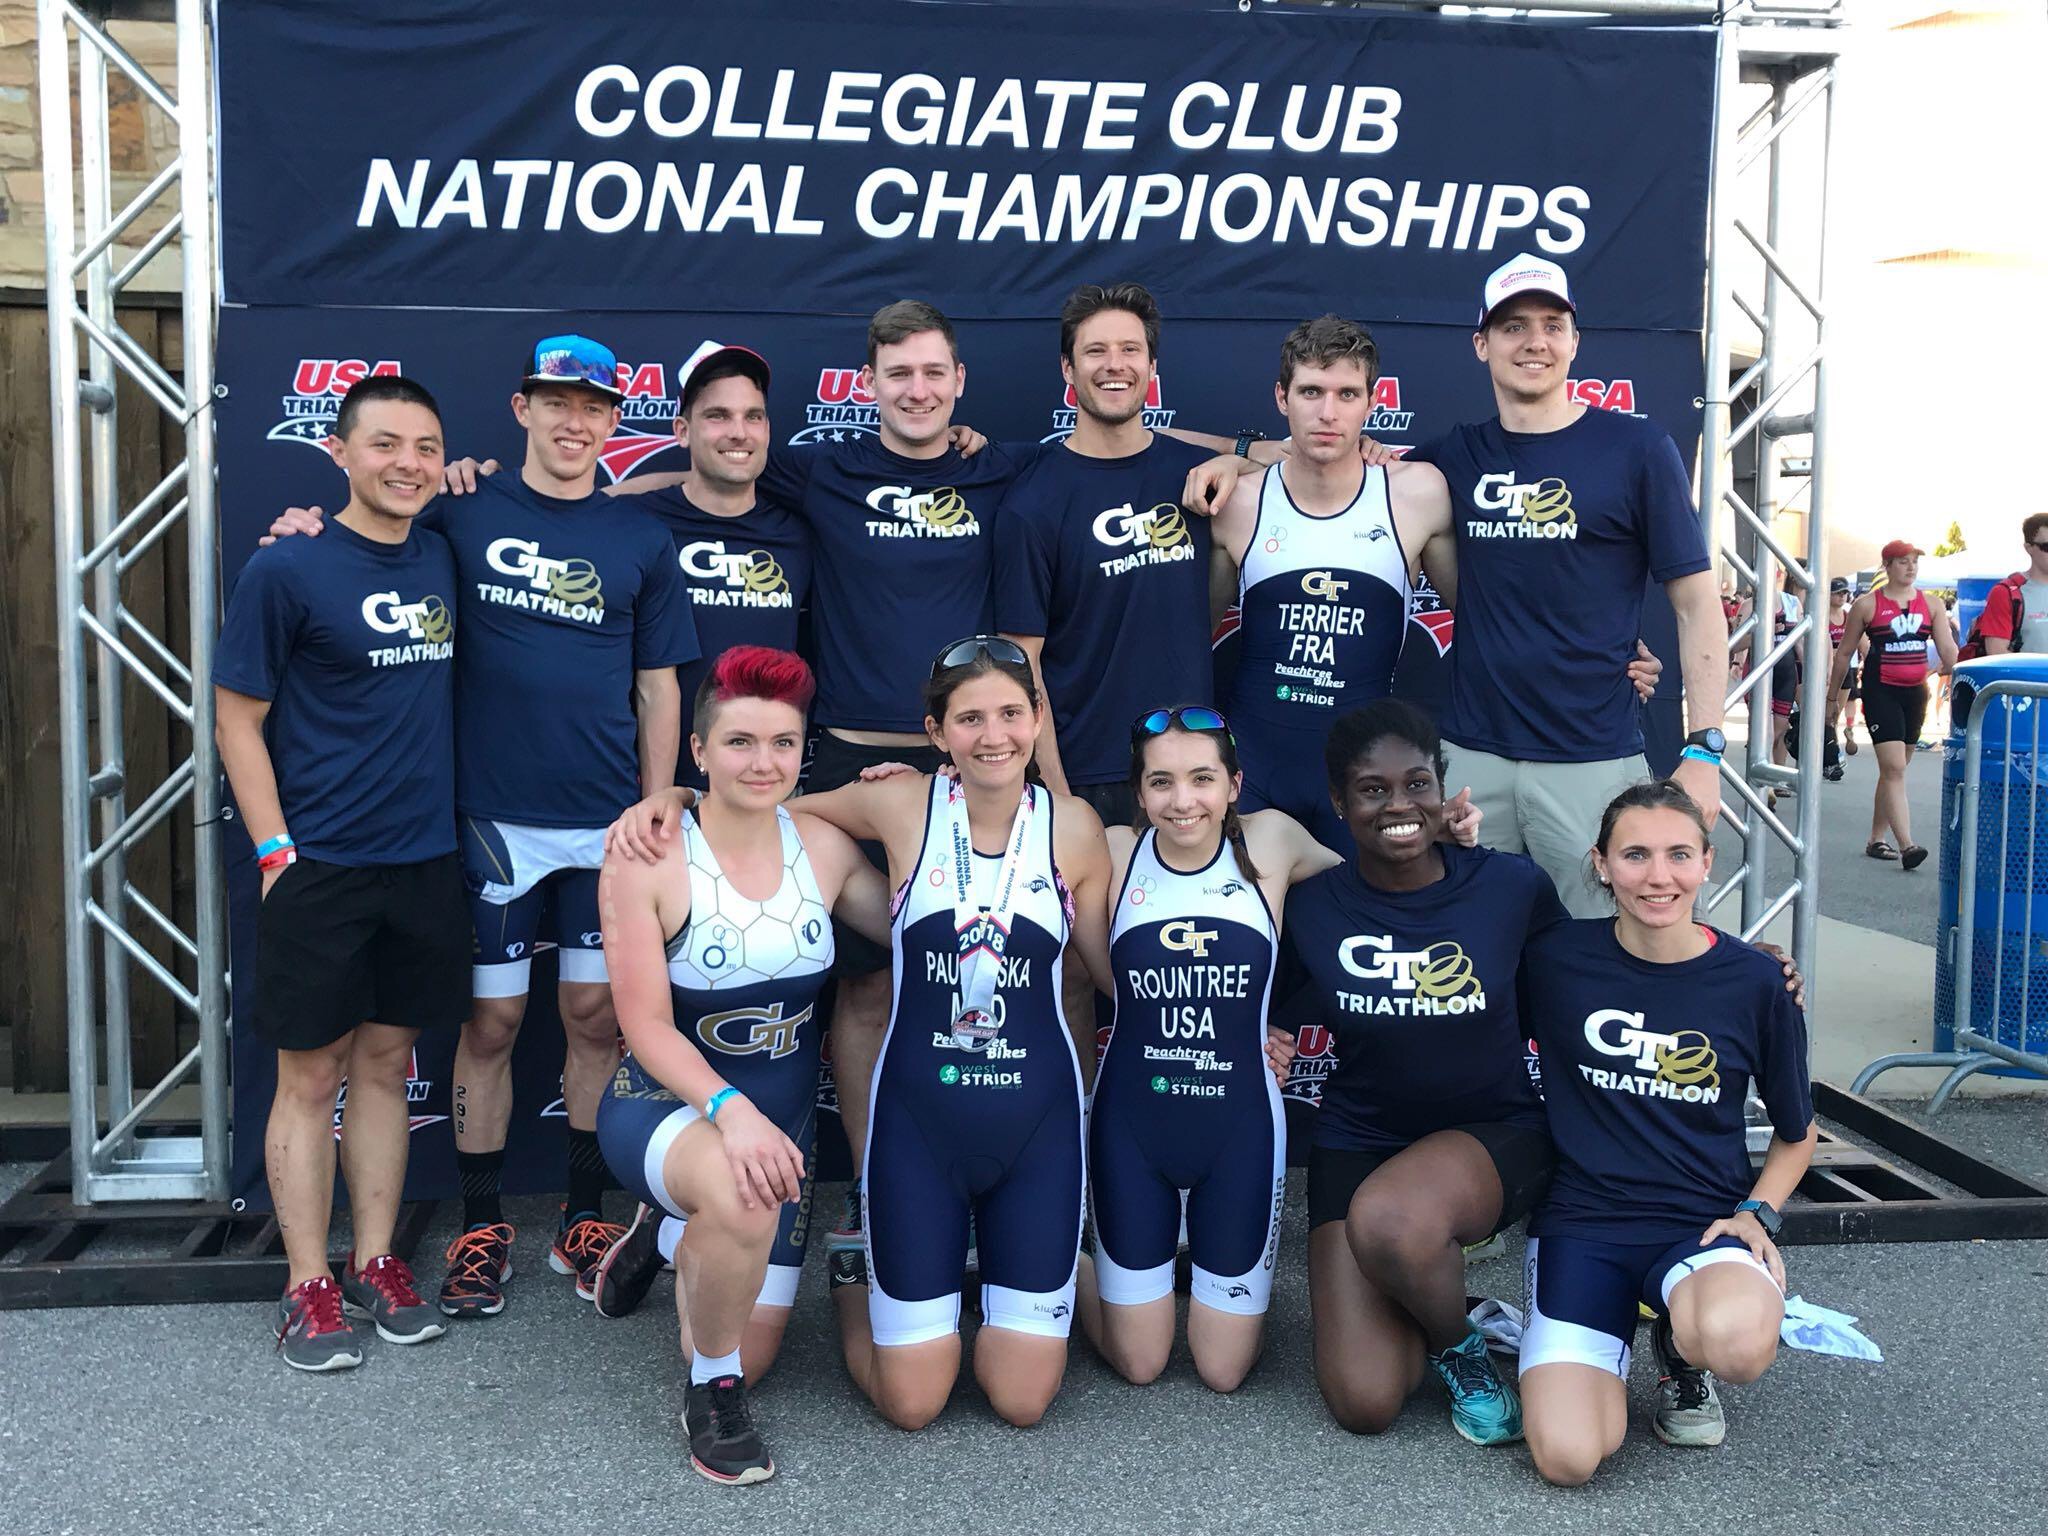 The Triathlon Club poses in front of a banner at the 2018 National Championships (Photo: GT Triathlon Club).